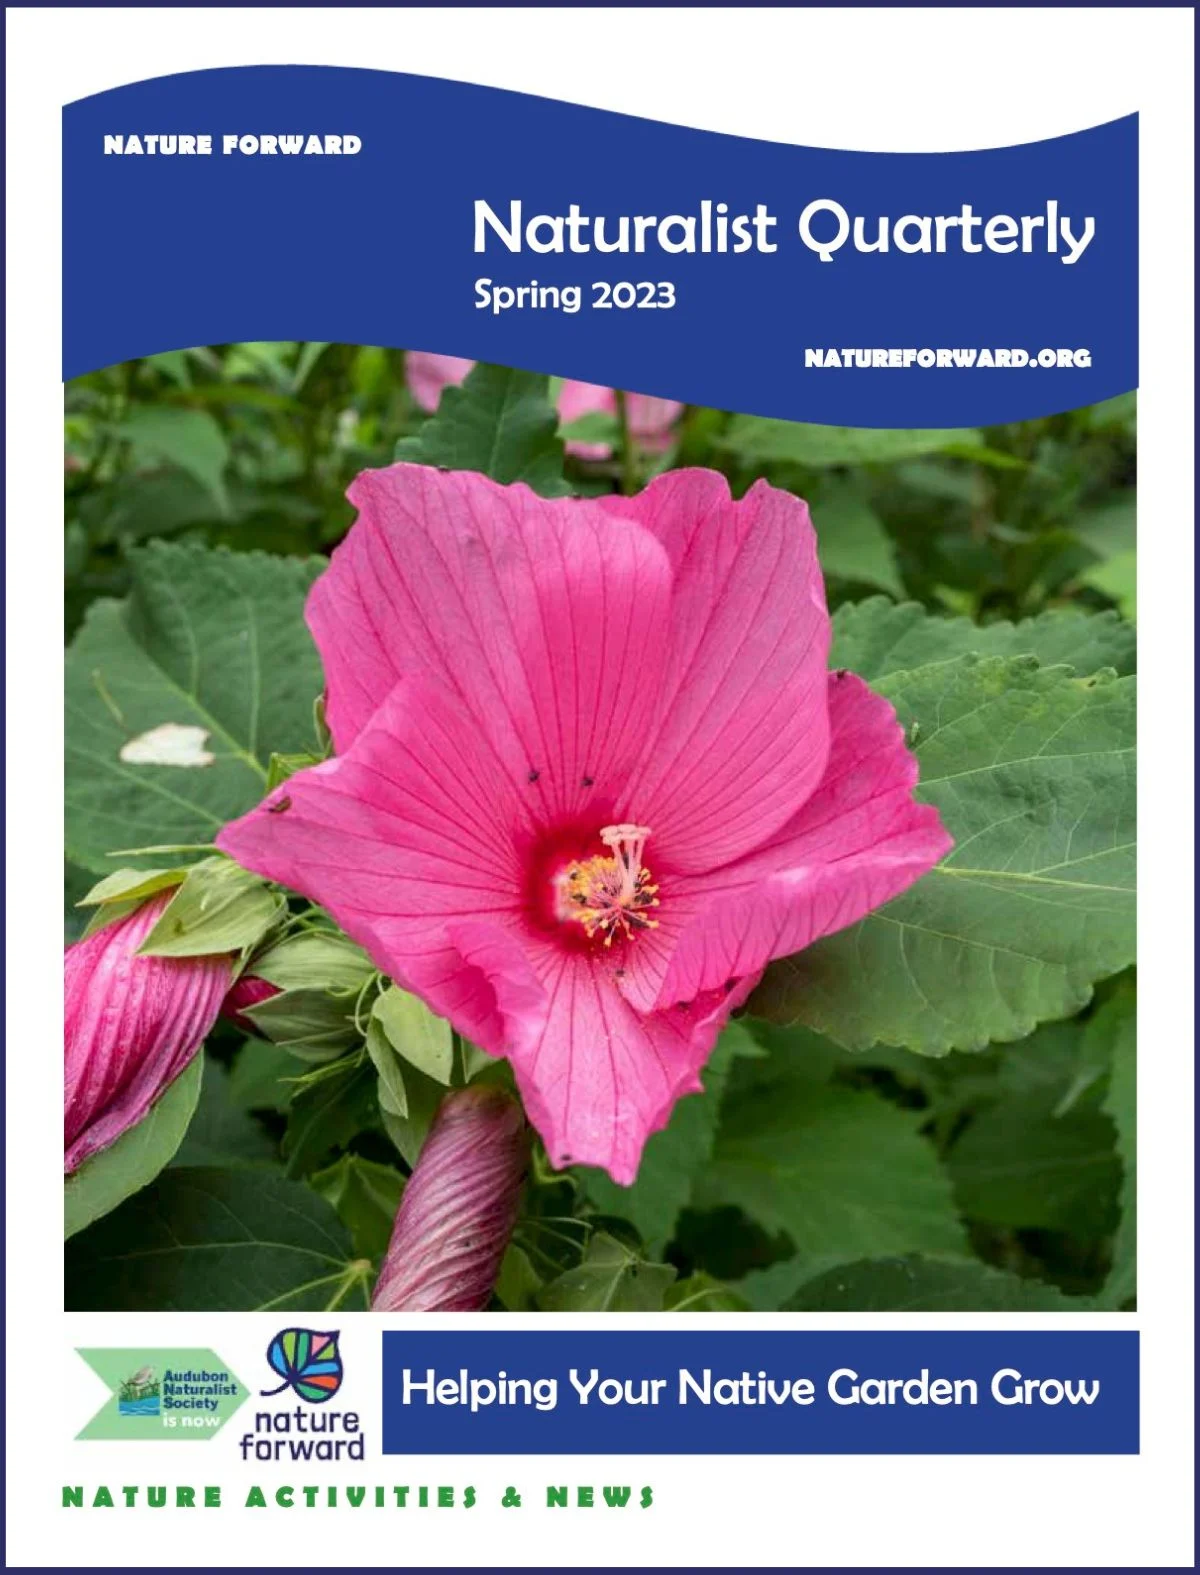 The Naturalist Quarterly, Spring 2023 Edition